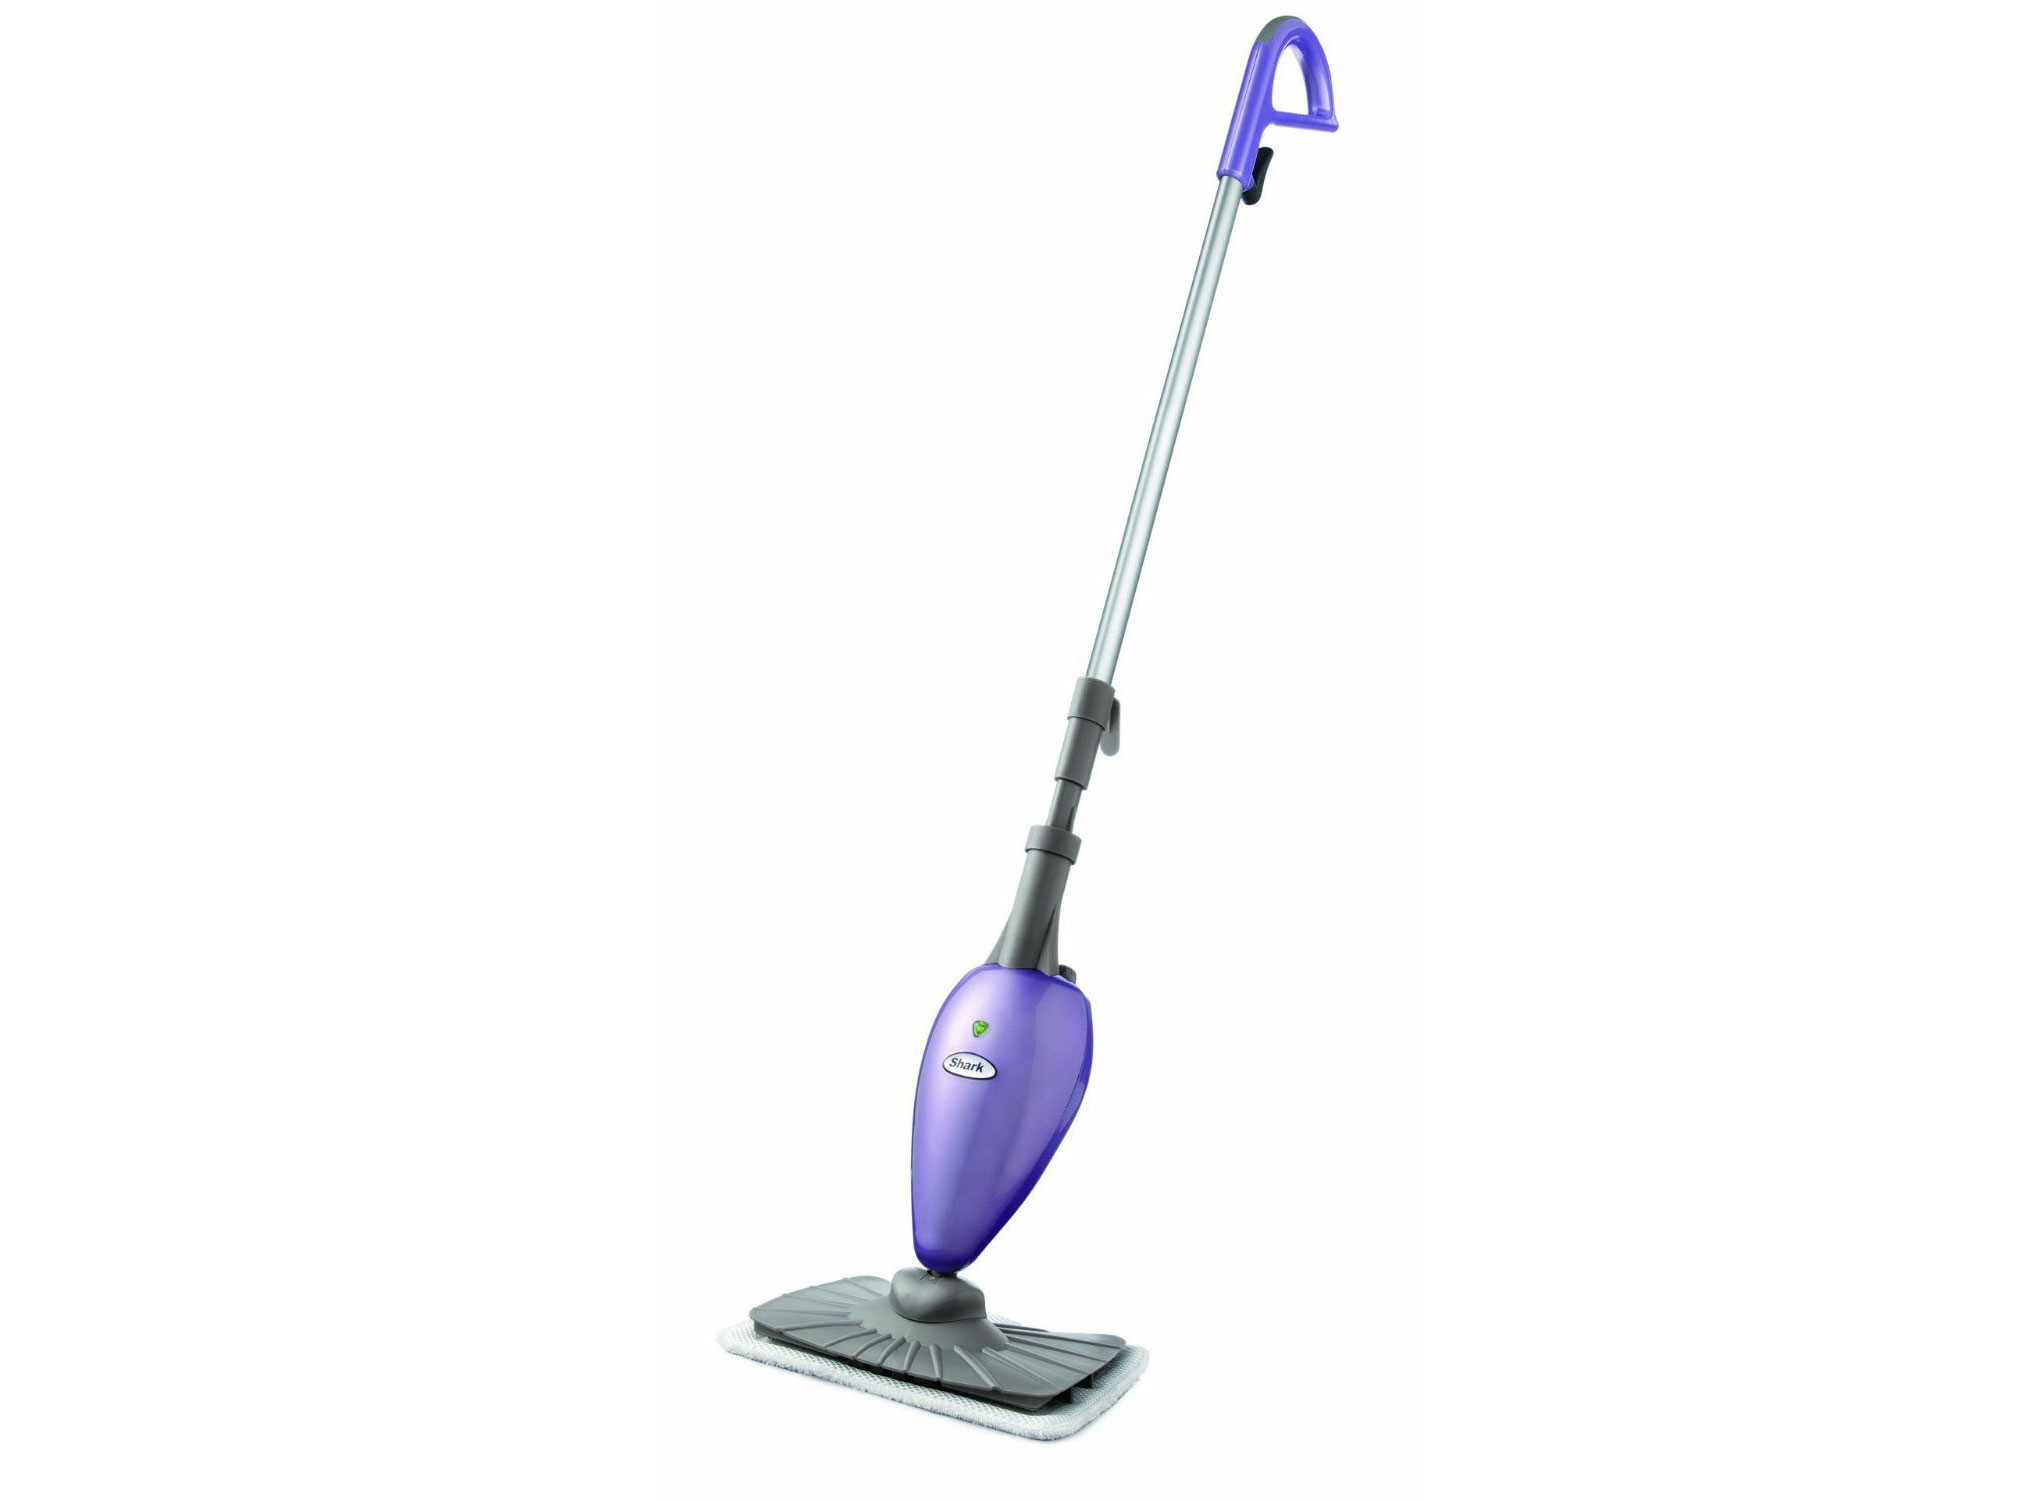 18 Unique Hardwood Floor Cleaning Machine Reviews 2024 free download hardwood floor cleaning machine reviews of the 4 best steam mops throughout 545e3670 5b7a 407a 917d 562e89f68073 2f00d574 547b 4c8c ae67 64fa9ad8e040 shark